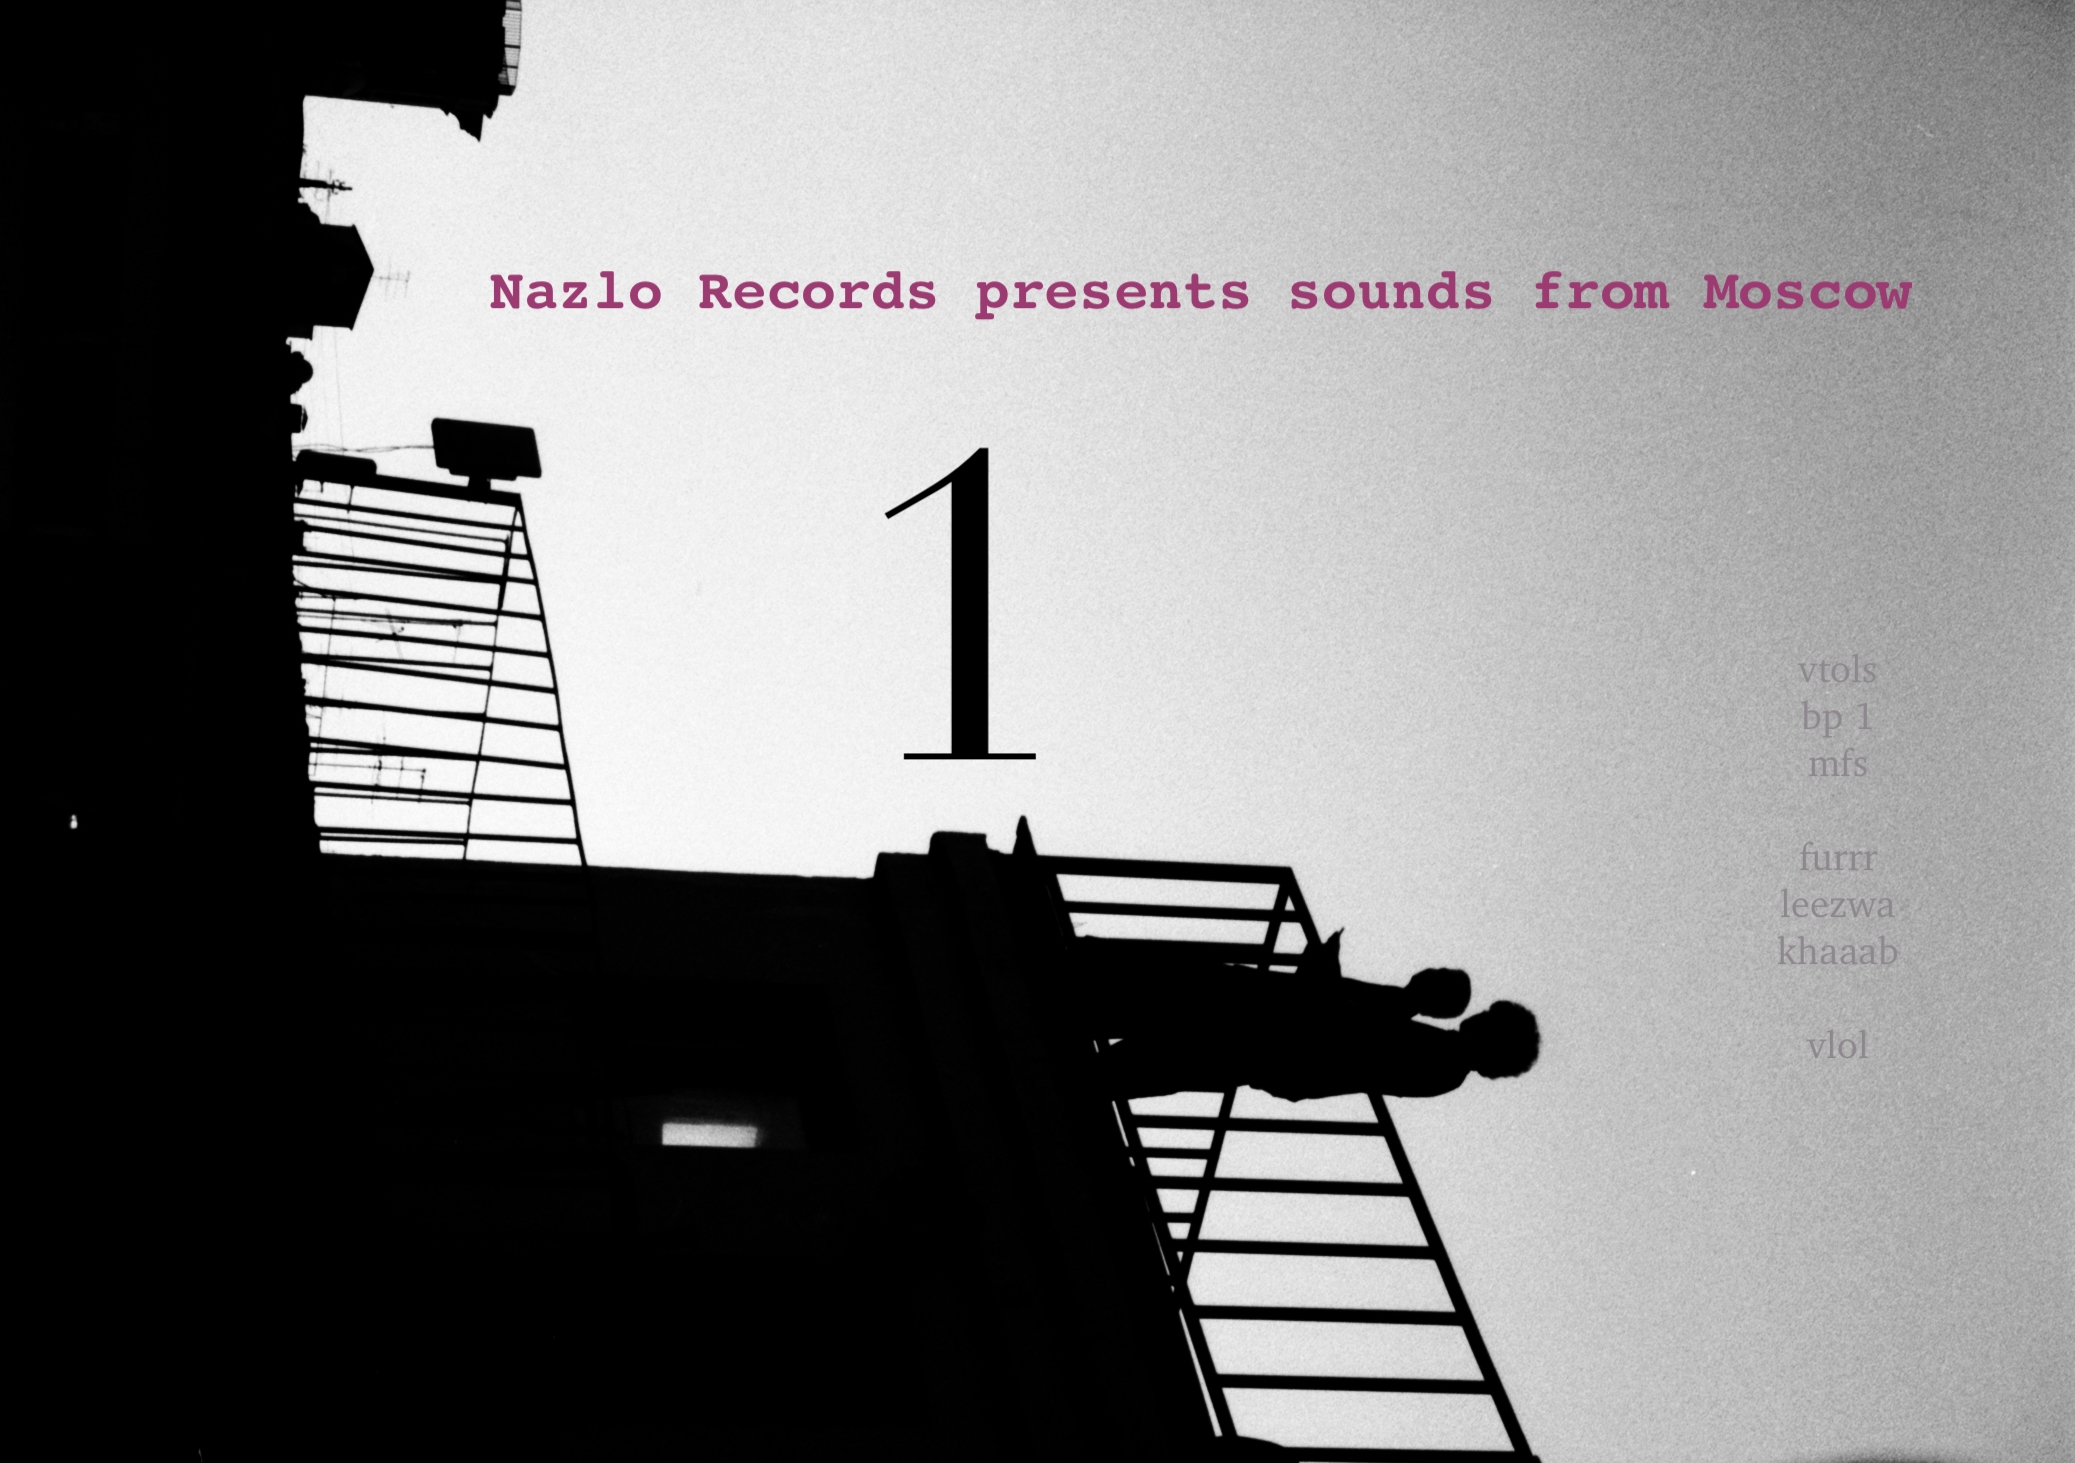 Nazlo records presents sounds from Moscow – 1